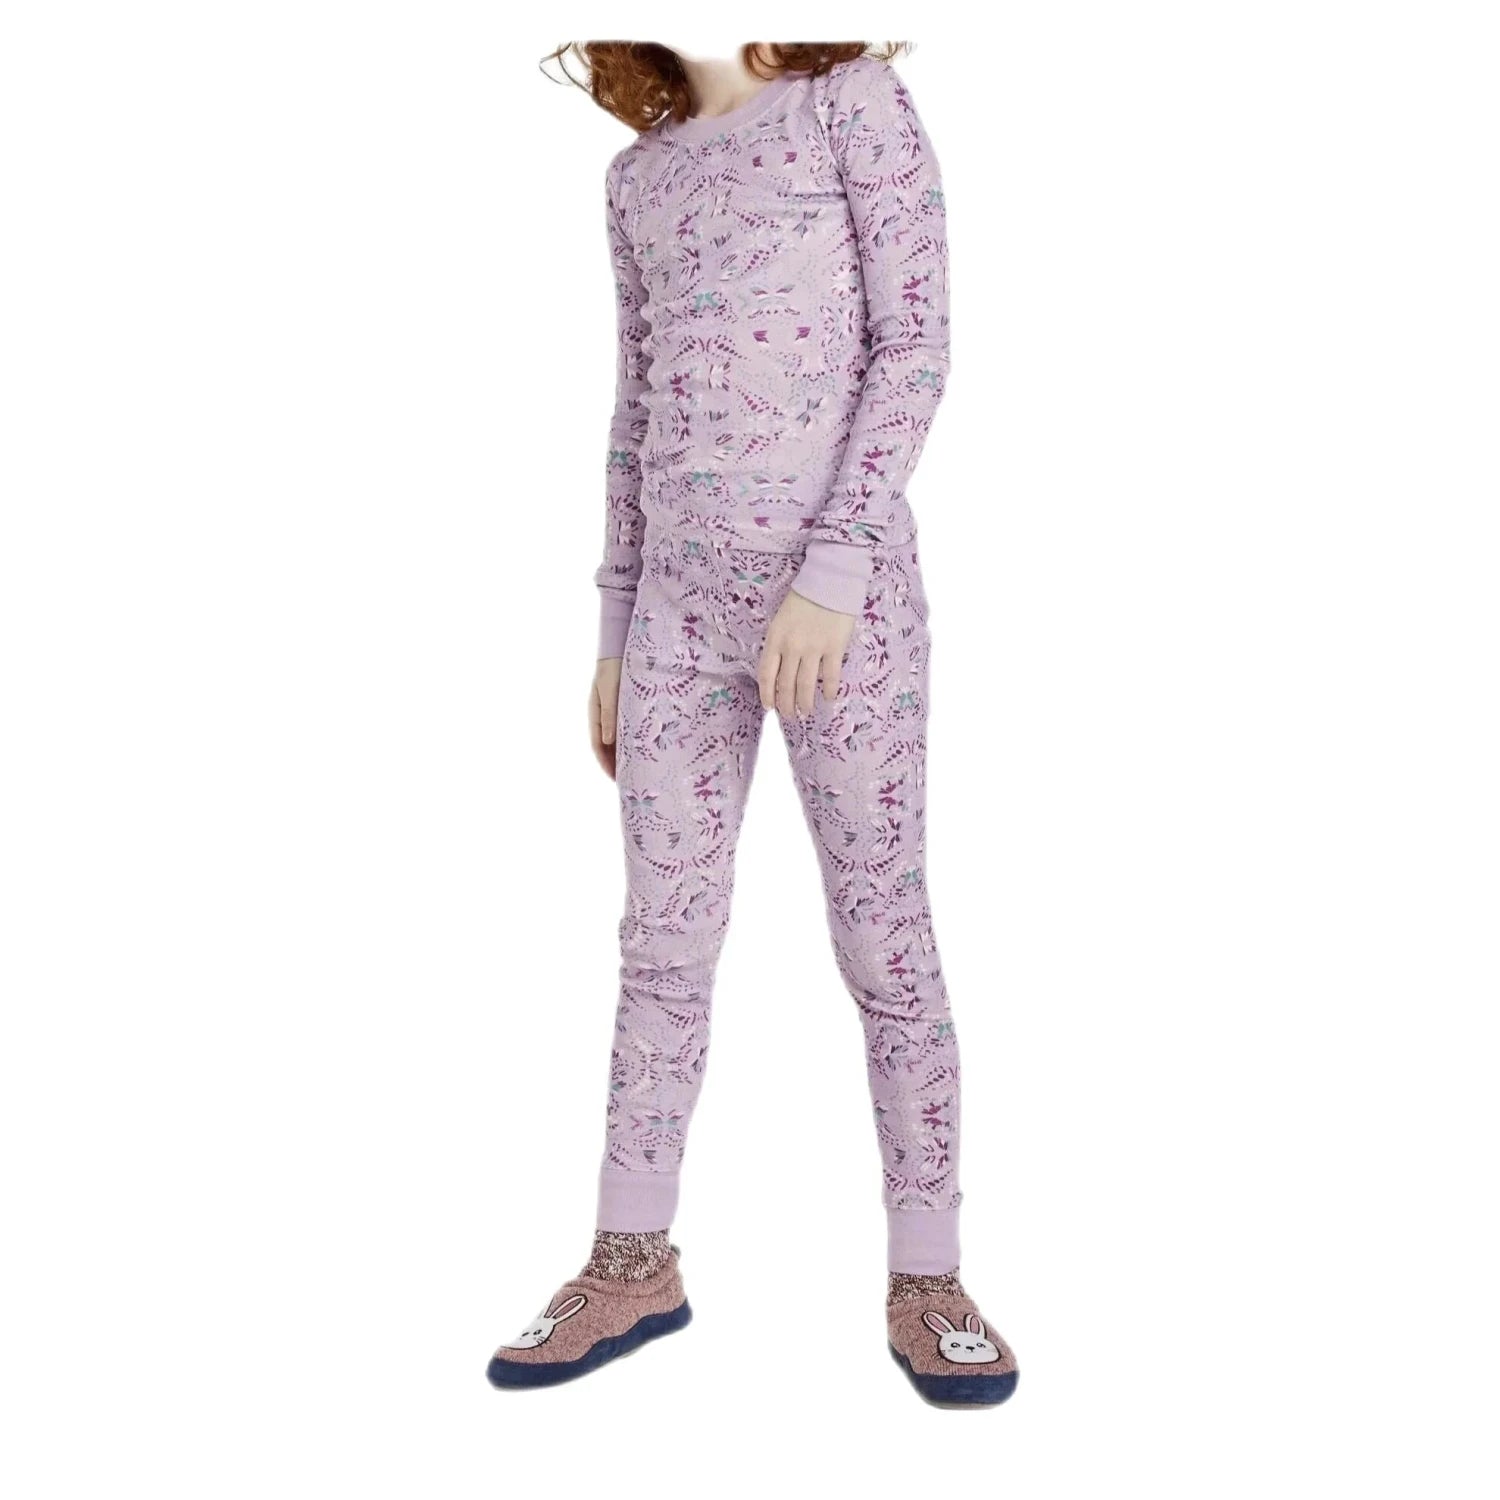 LL Bean Kid's Organic Cotton Fitted Pajamas shown in the Lavender Ice Butterfly, front view, on model